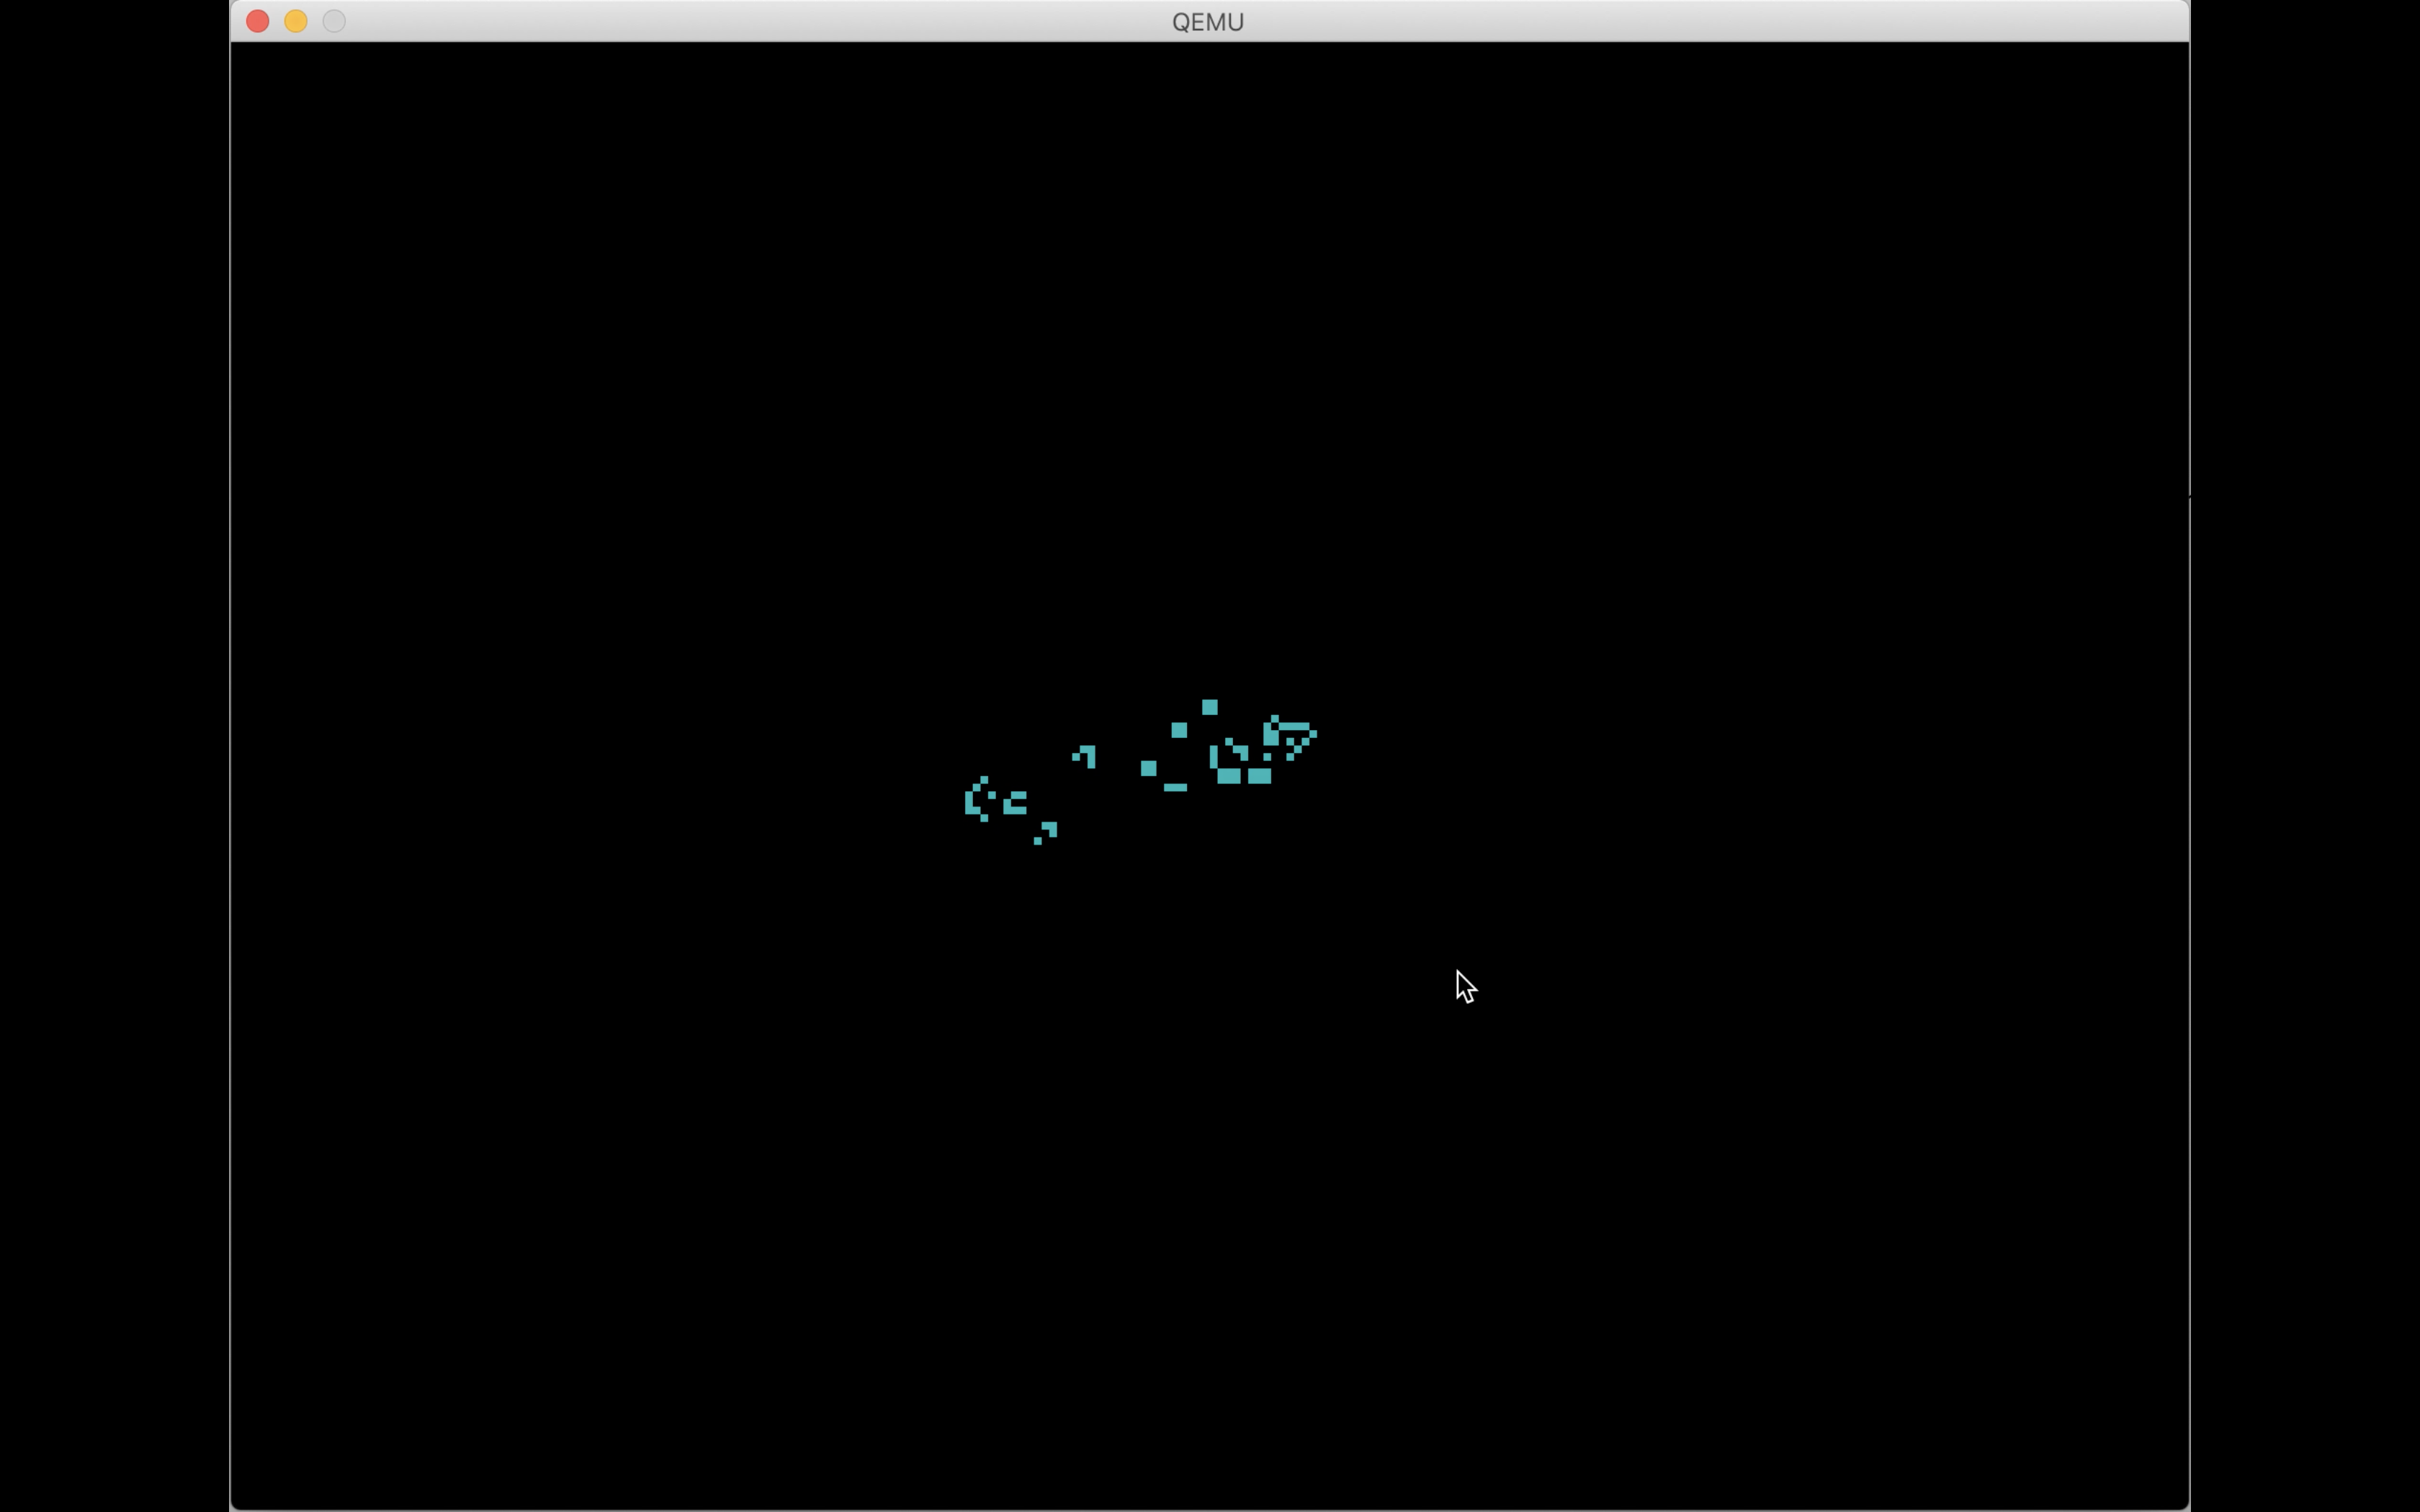 screenshot of Game of Life running on Mu without any intervening Operating System